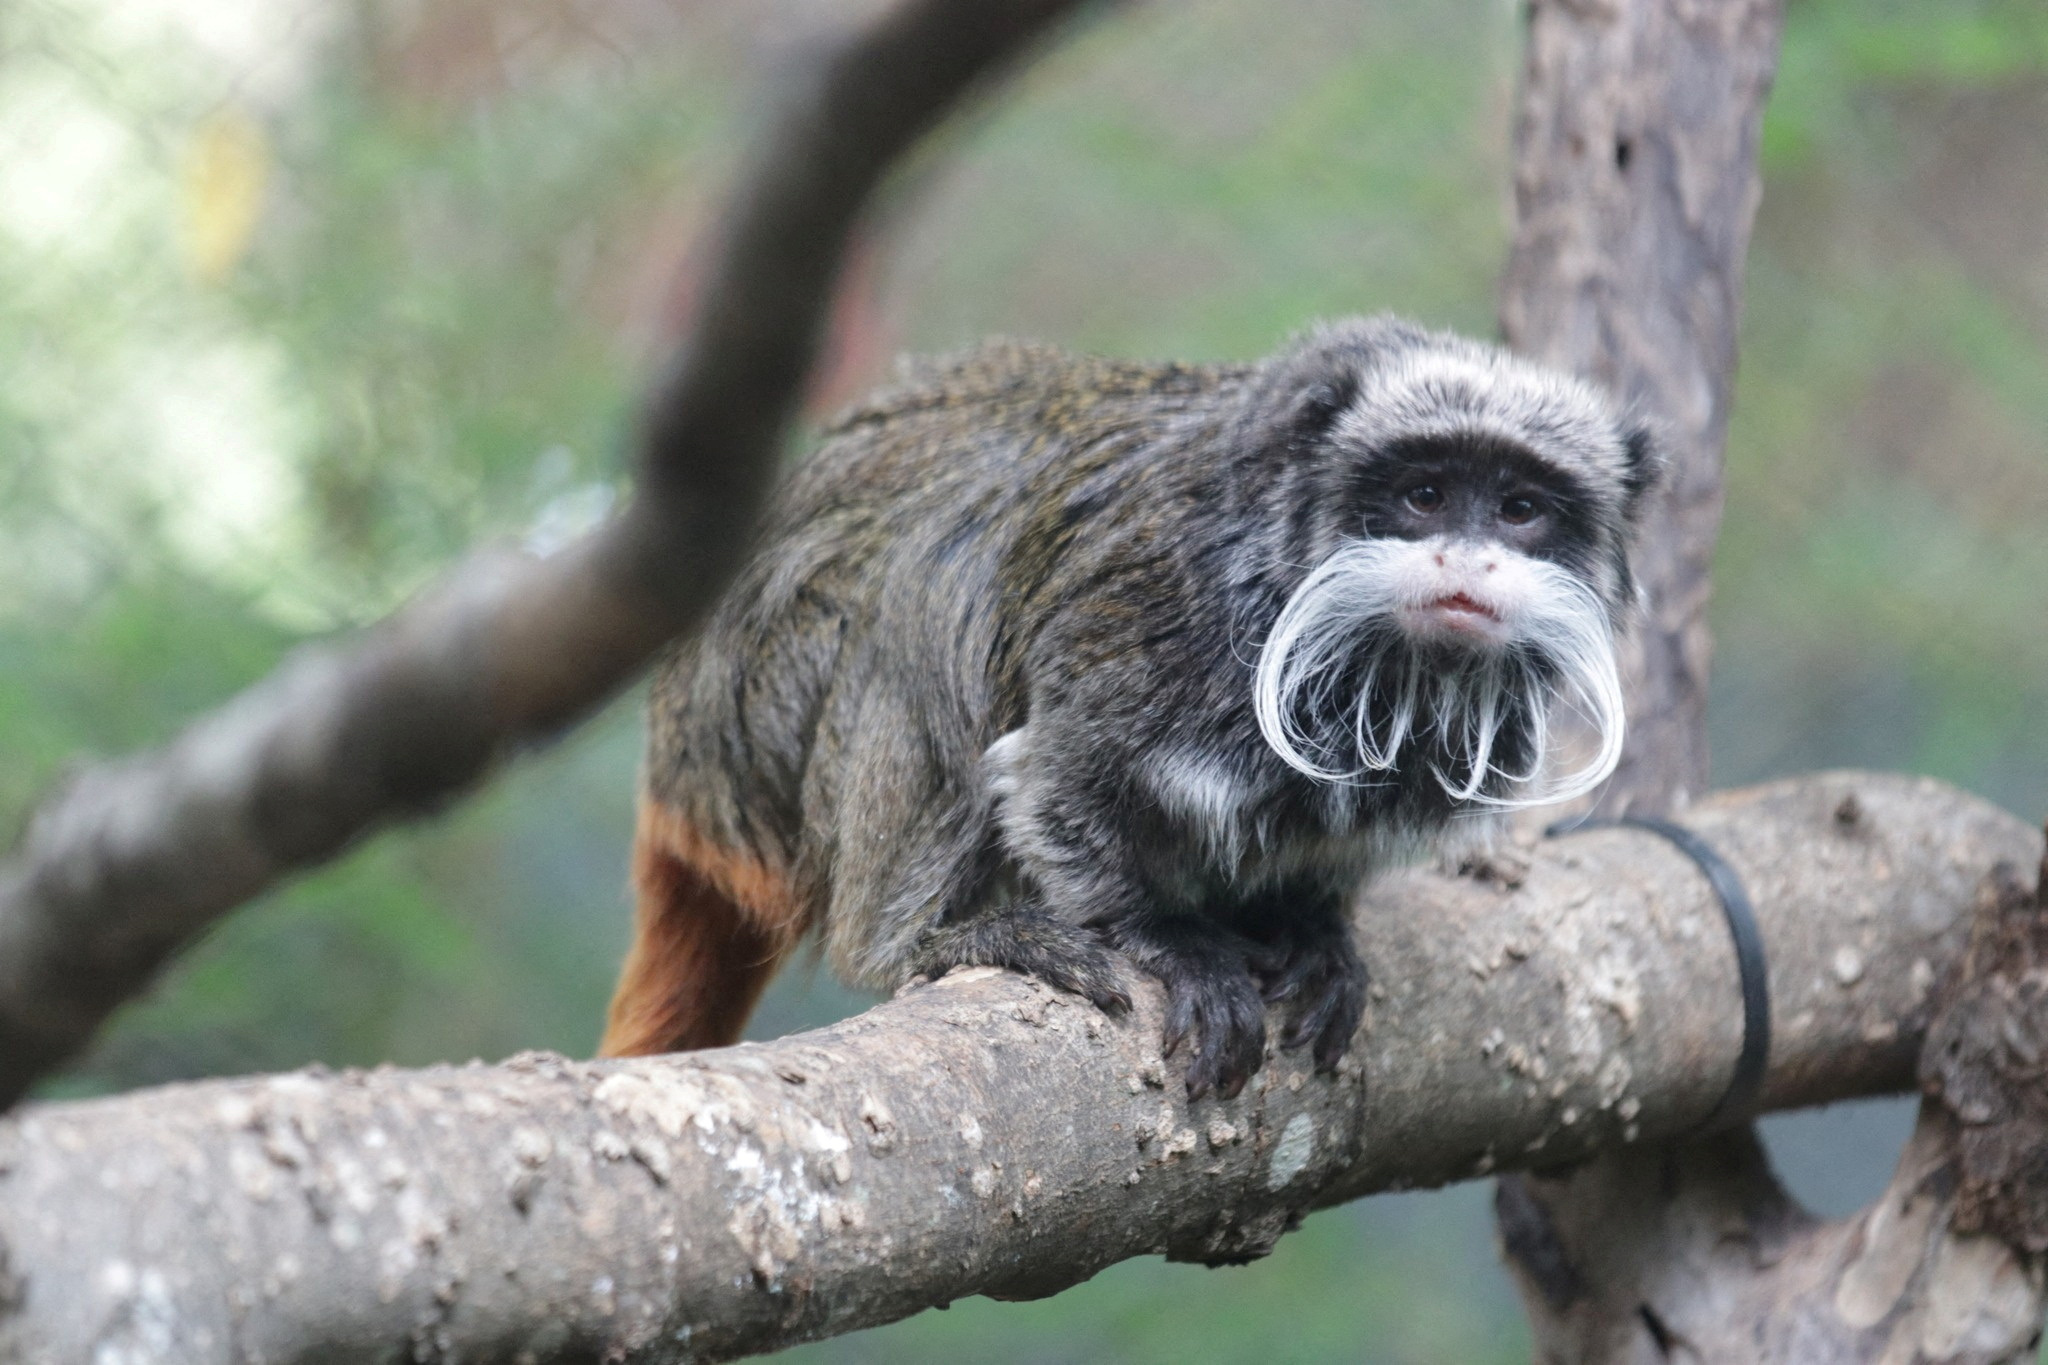 An emperor tamarin monkey is seen perched on a branch